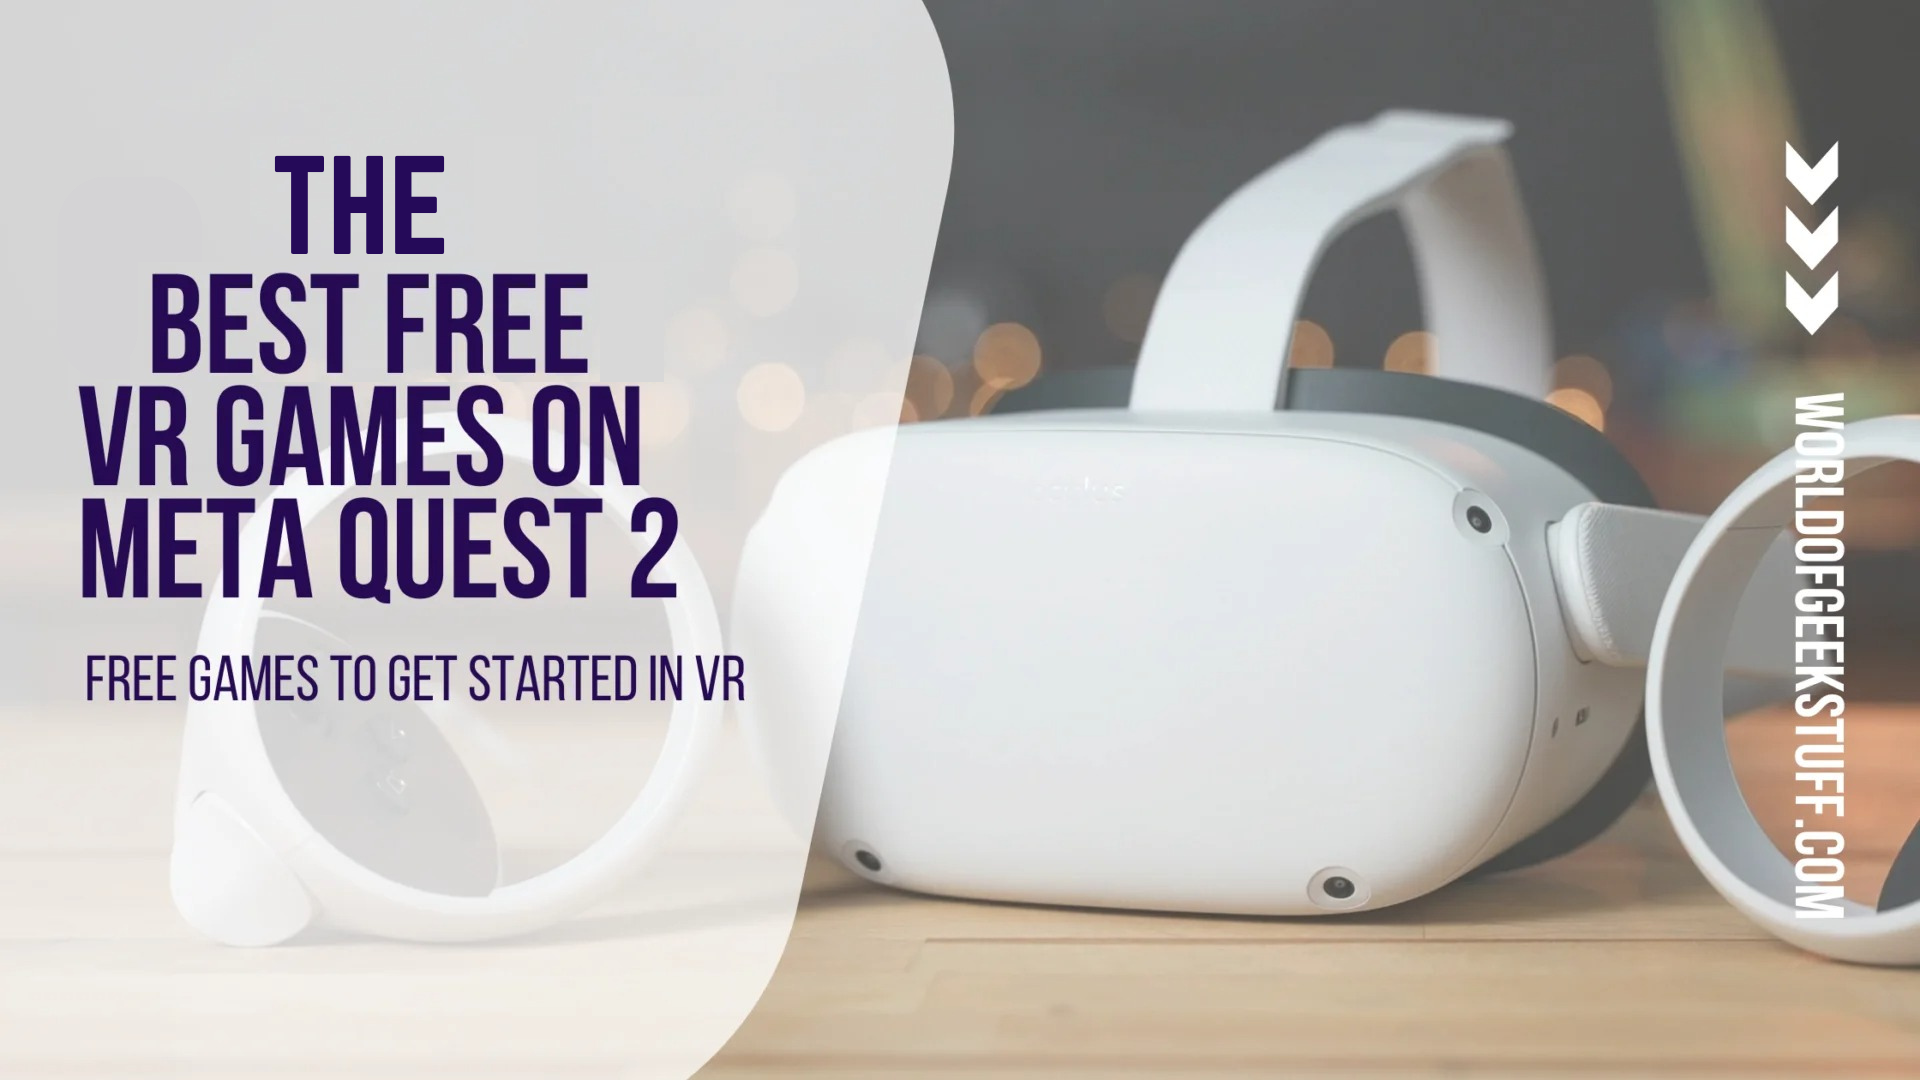 The Best Free VR Games on Meta Quest 2 - The Best Free VR Games for Meta Quest 2